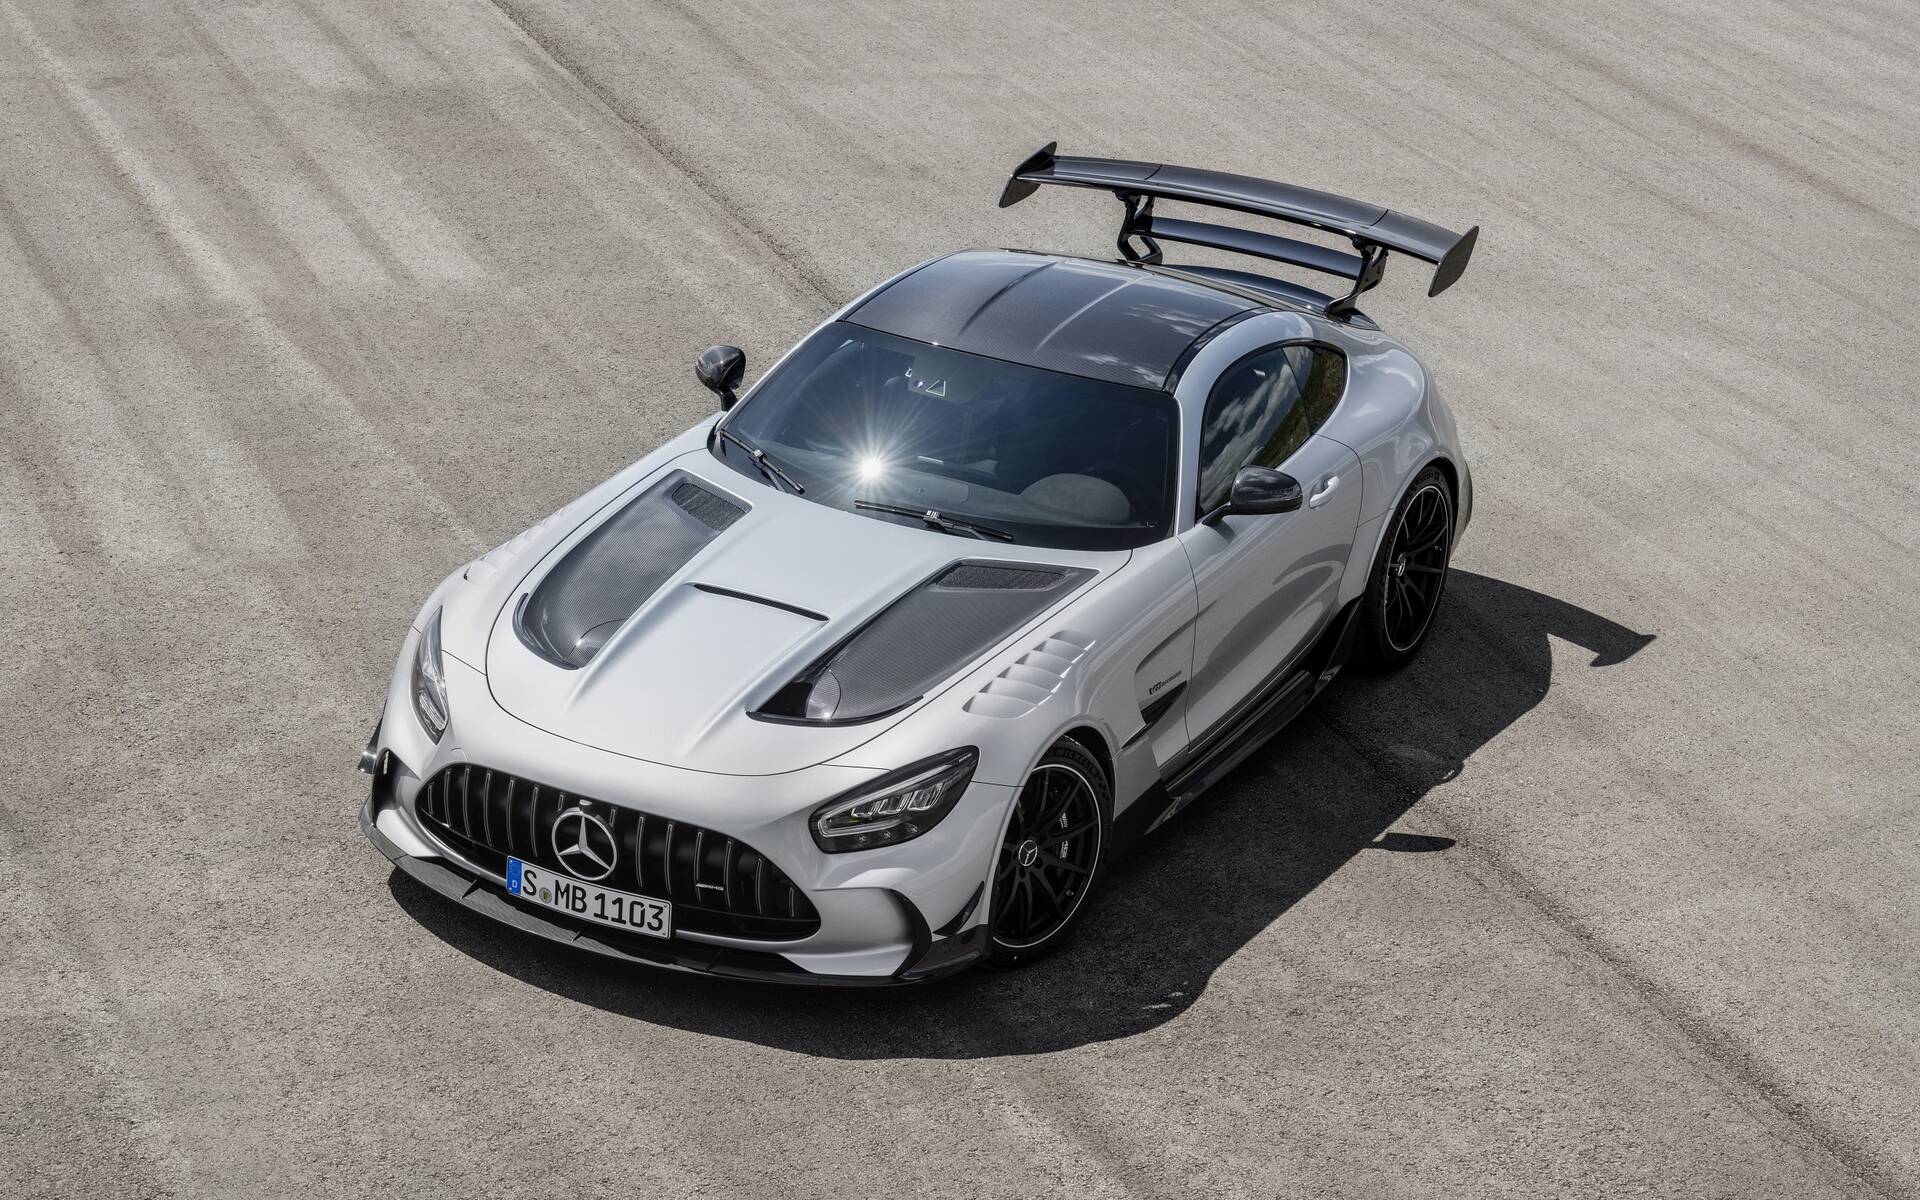 The all-new Mercedes-AMG GT